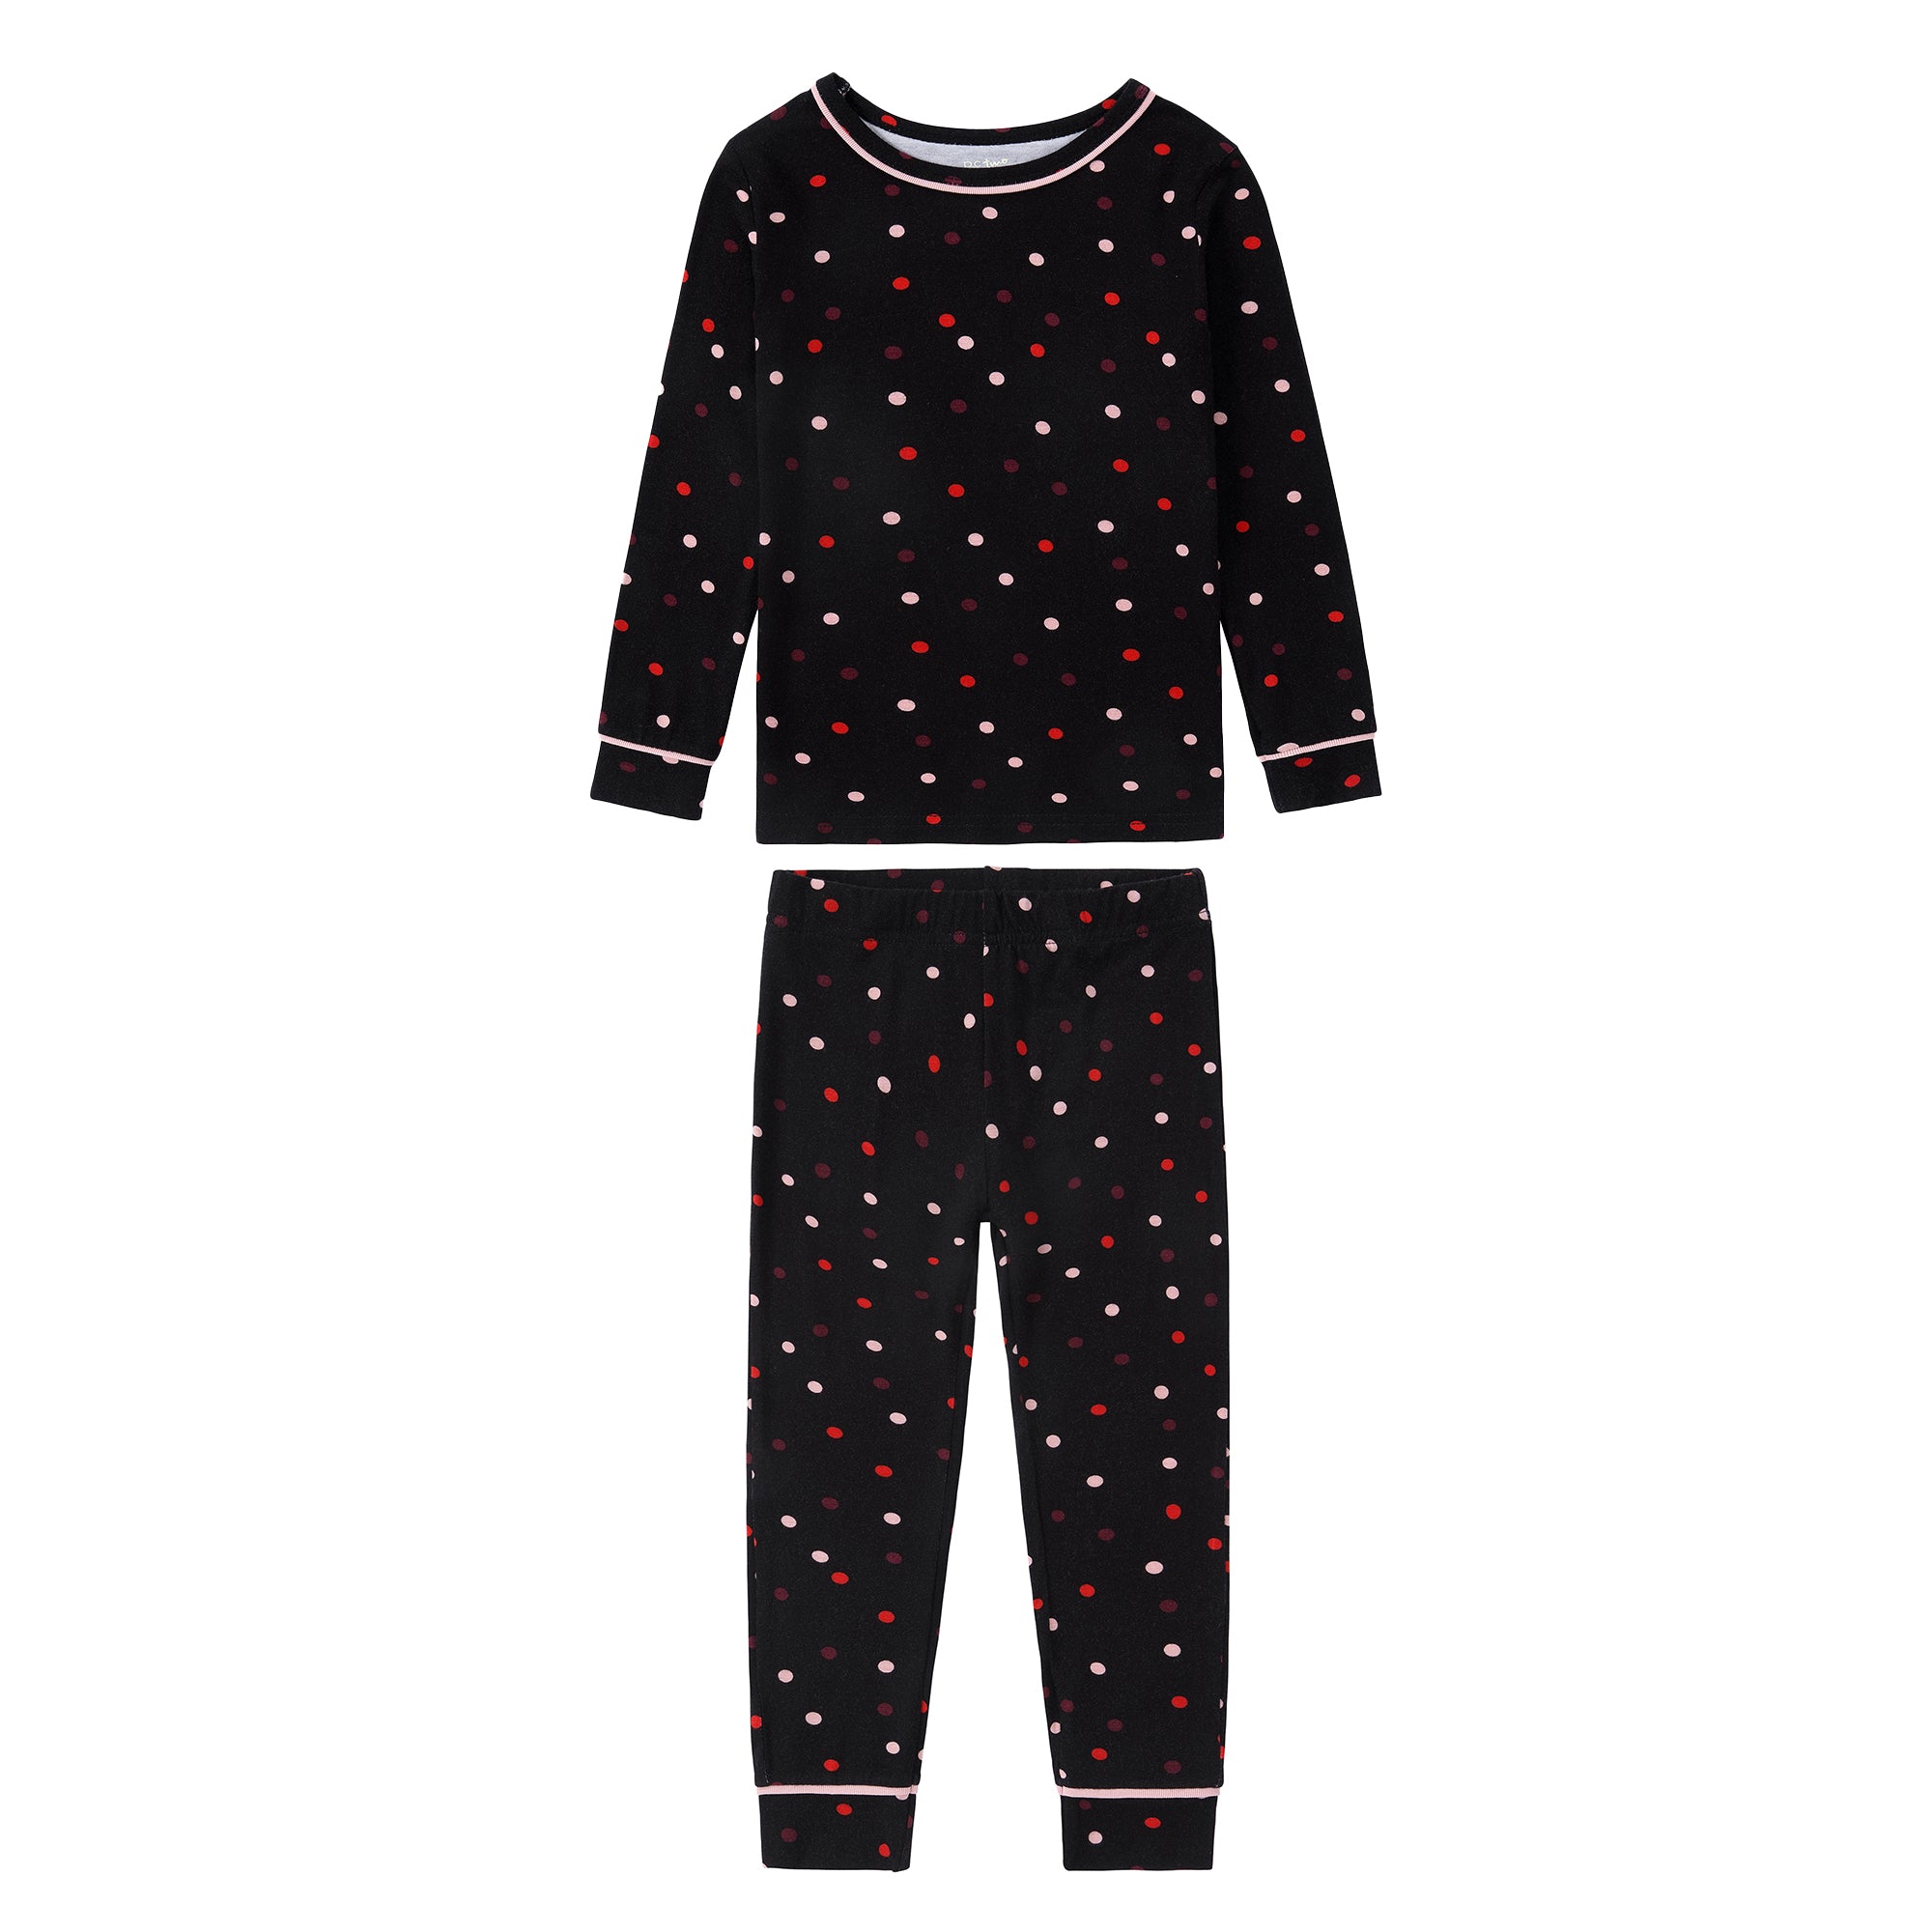 Black Colorful Polka Dot Pajama With Pink Accents